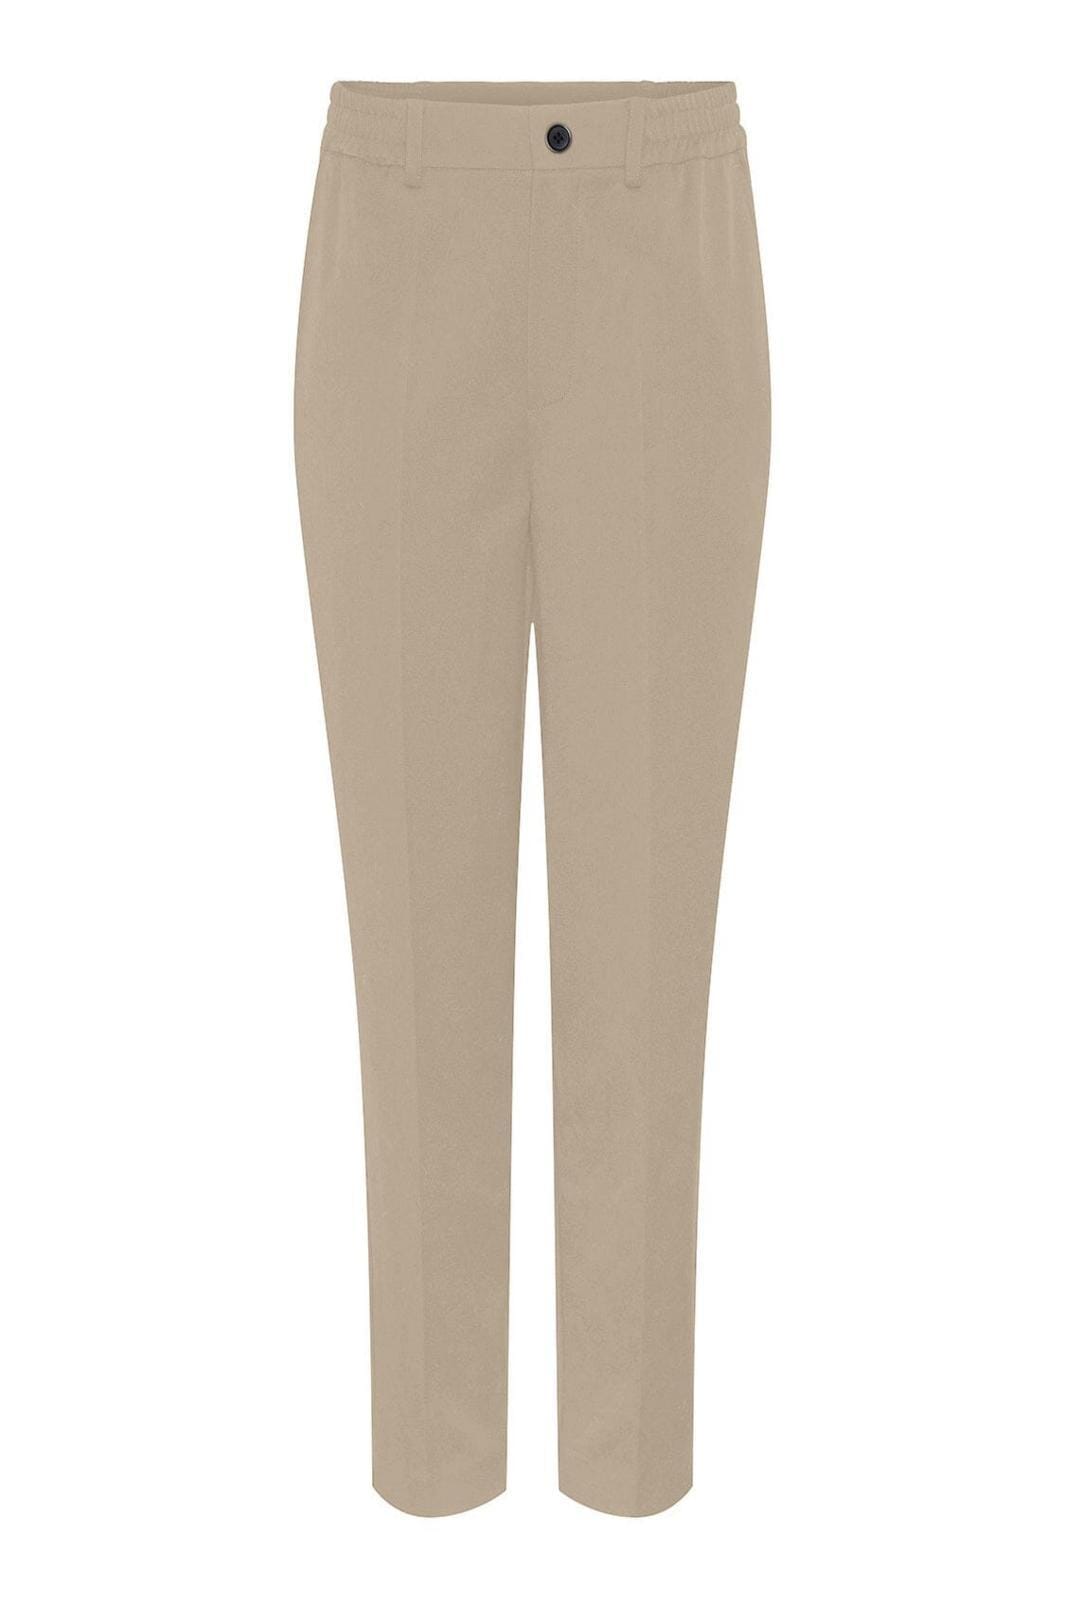 Pieces, Pccamil Hw Ankle Pant, White Pepper